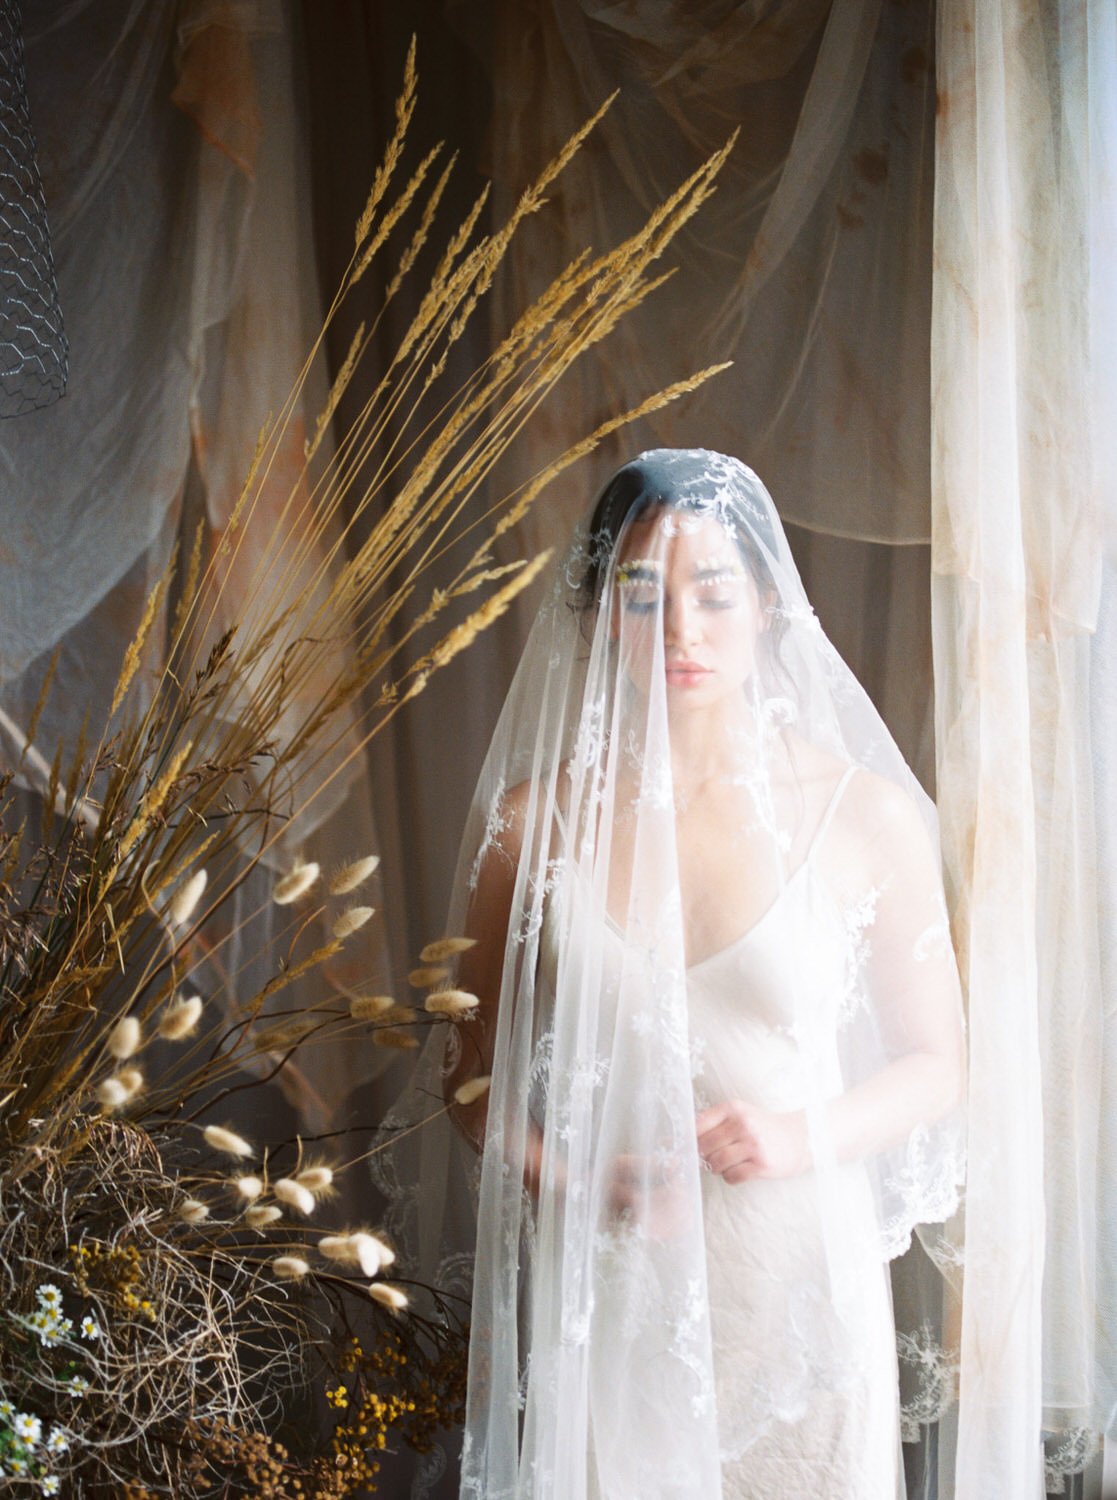  Peach Sorbet Tulle ・  Maricle Kang Photography  ・  Jacqueline Rae  ・  Fall for Florals  